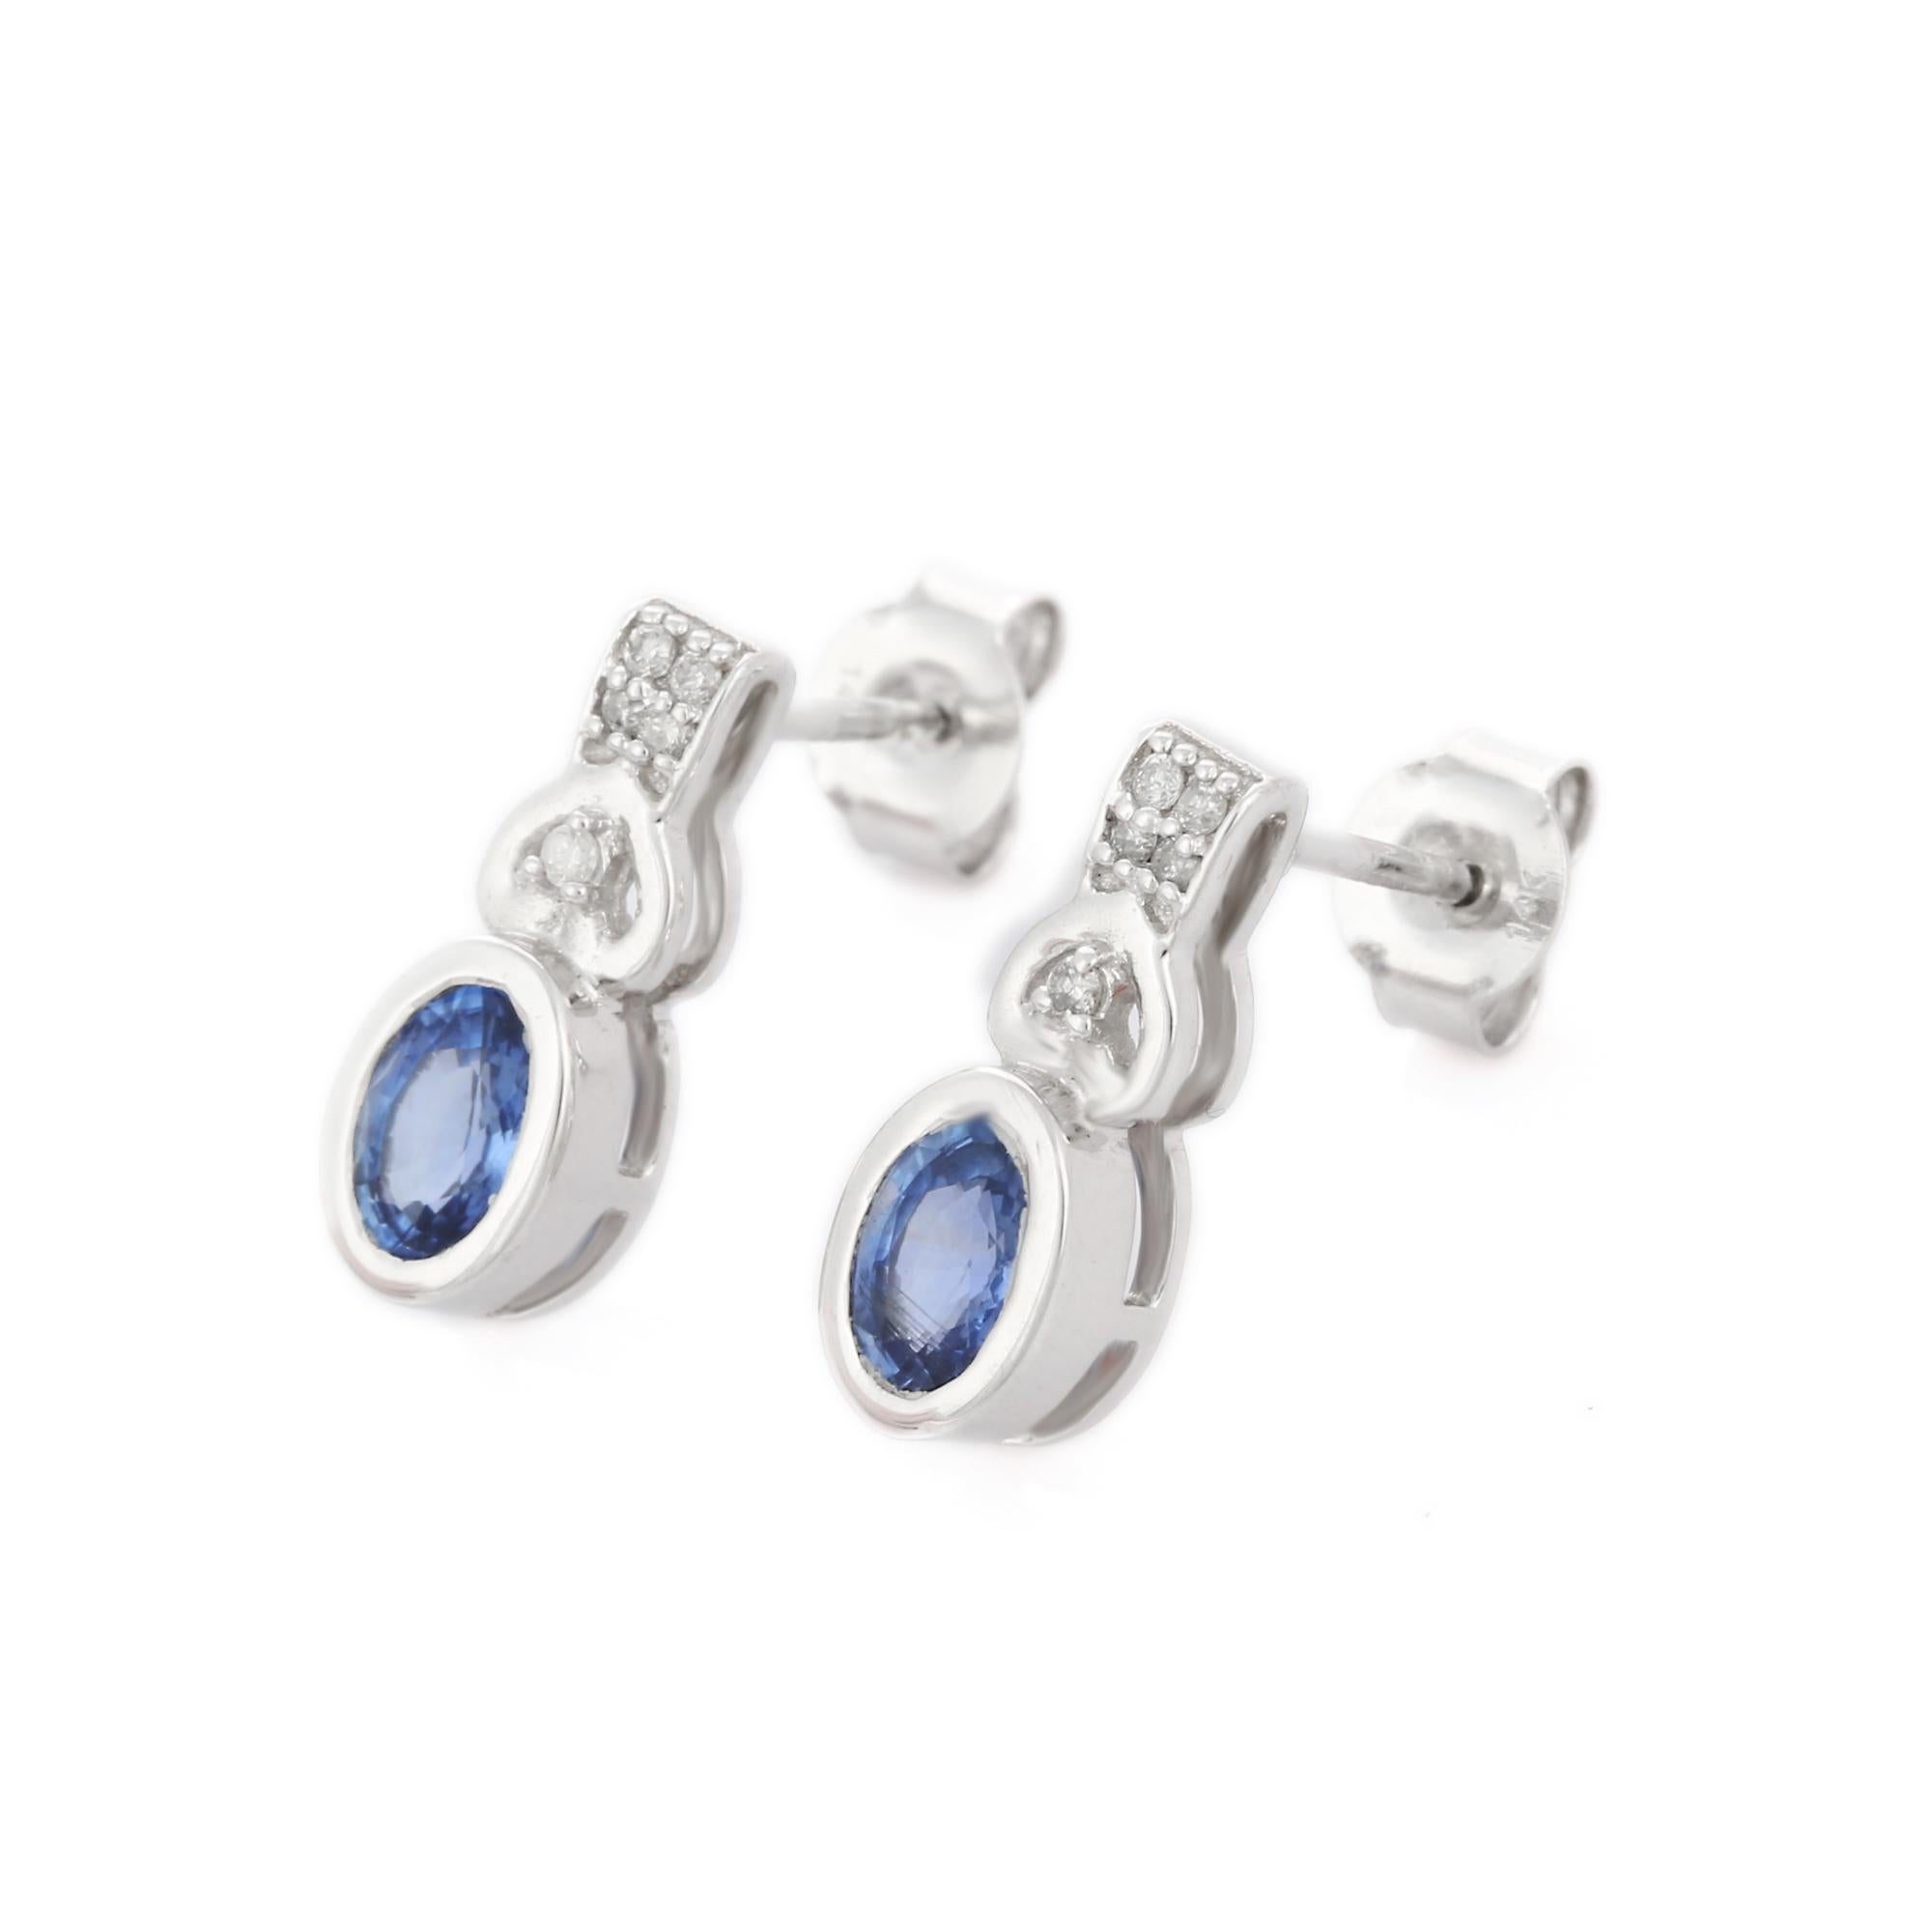 Studs create a subtle beauty while showcasing the colors of the natural precious gemstones and illuminating diamonds making a statement.

Oval cut blue sapphire studs in 14K gold. Embrace your look with these stunning pair of earrings suitable for